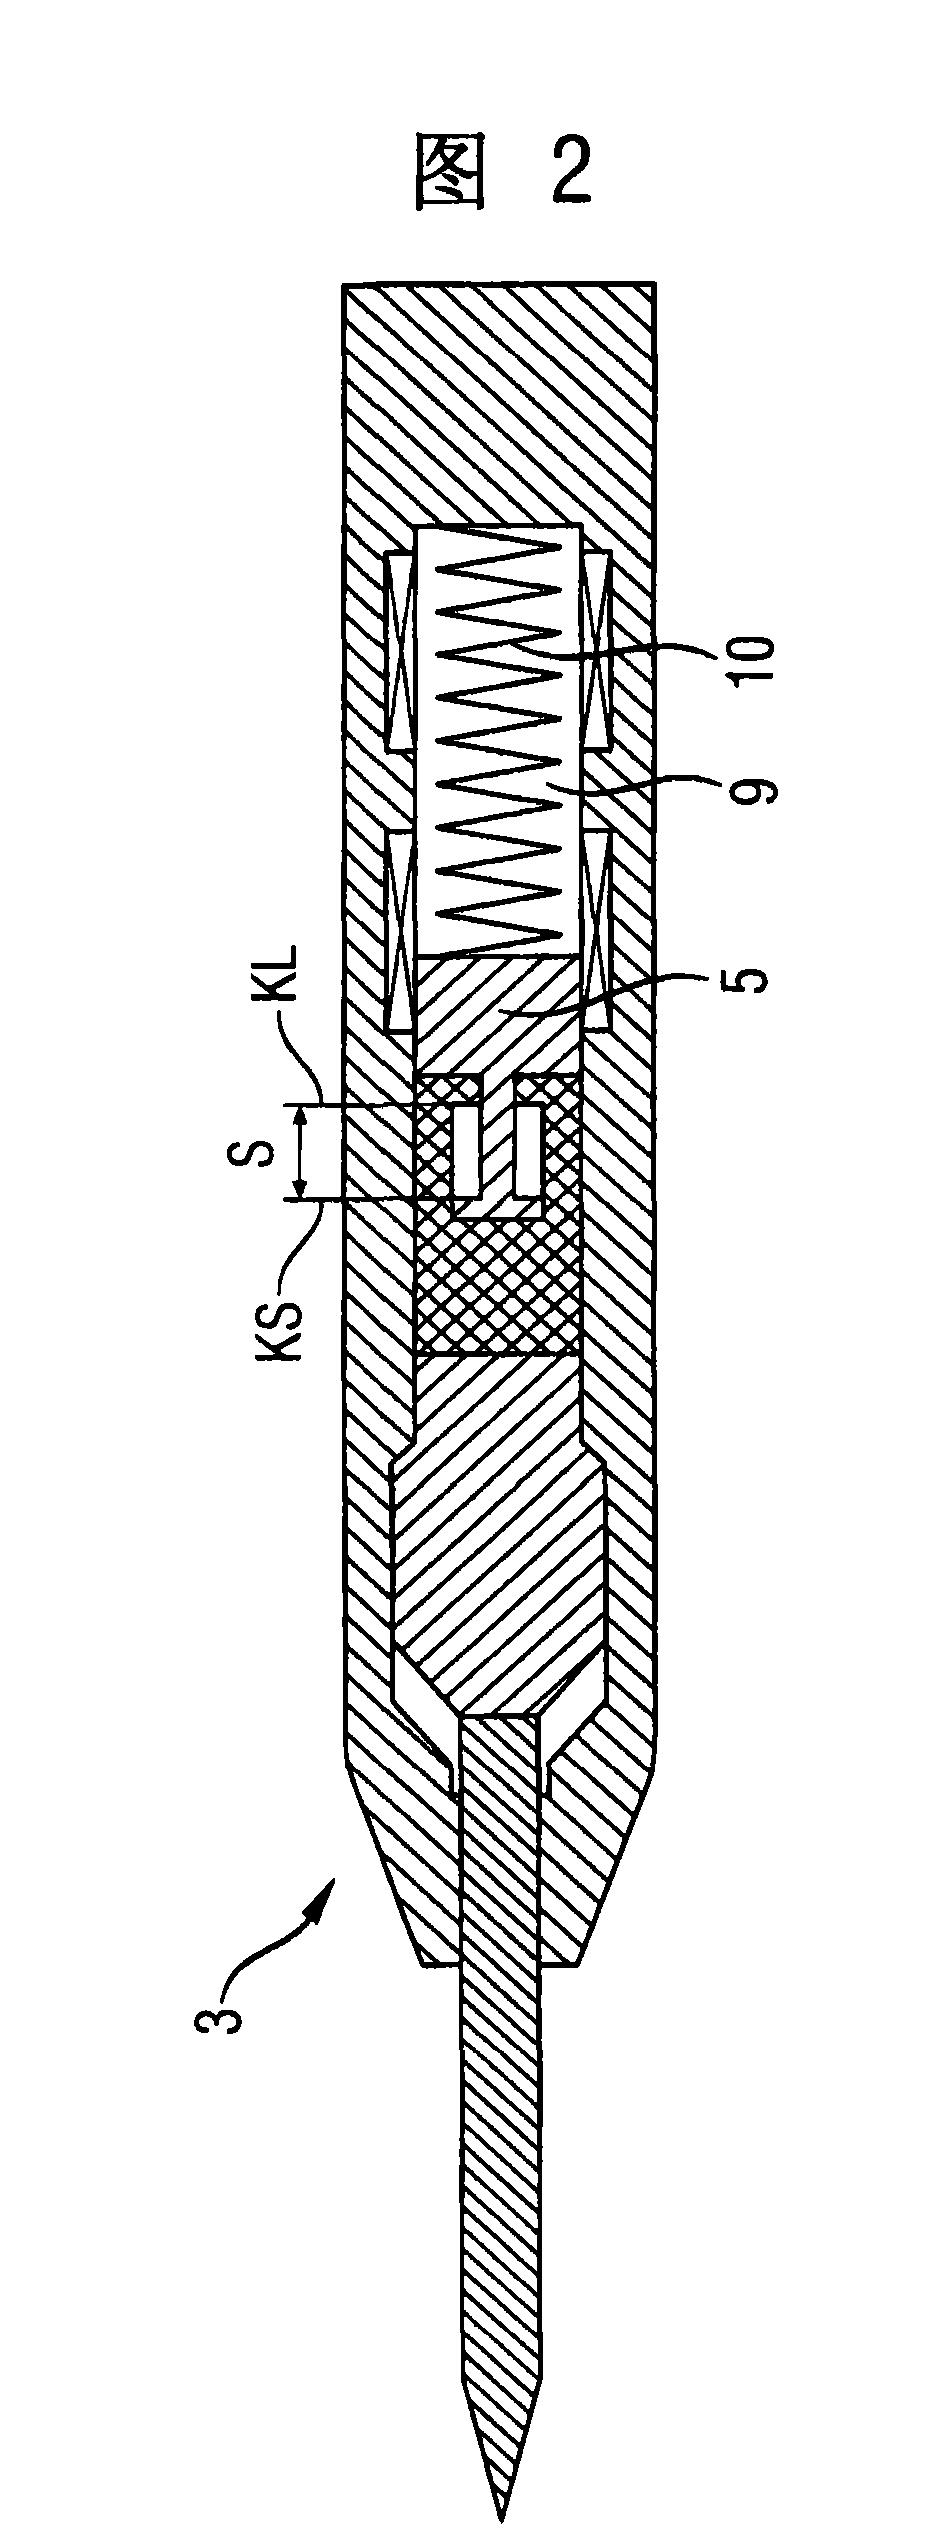 Method for controlling a linear motor for driving a striking mechanism